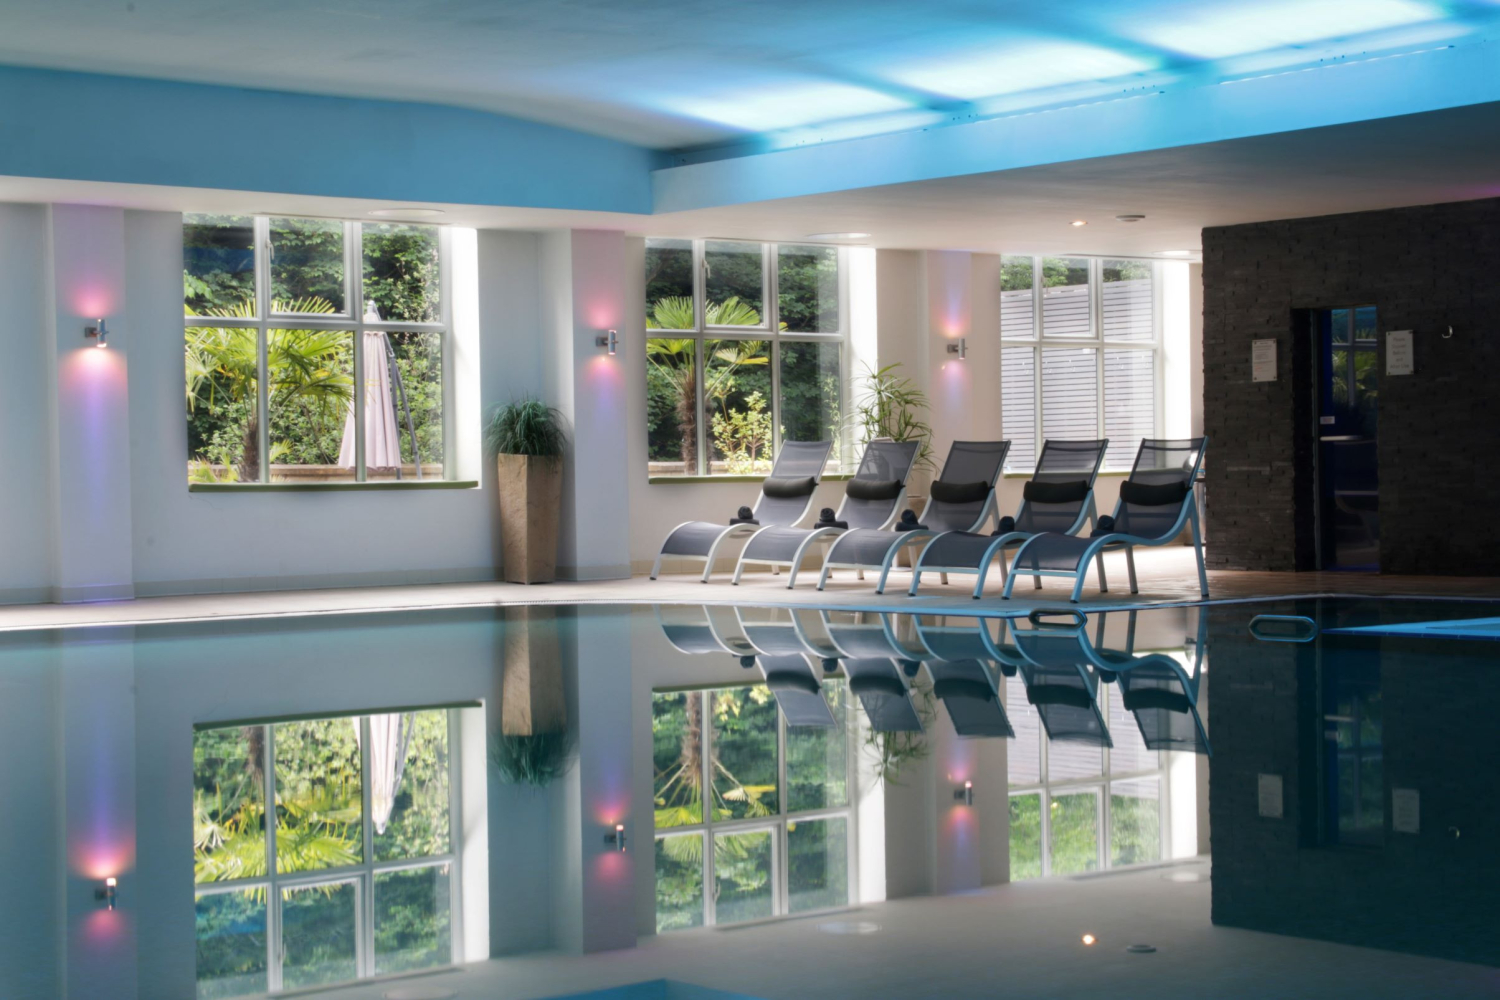 Titanic Spa Tests the Waters with Underwater Meditation